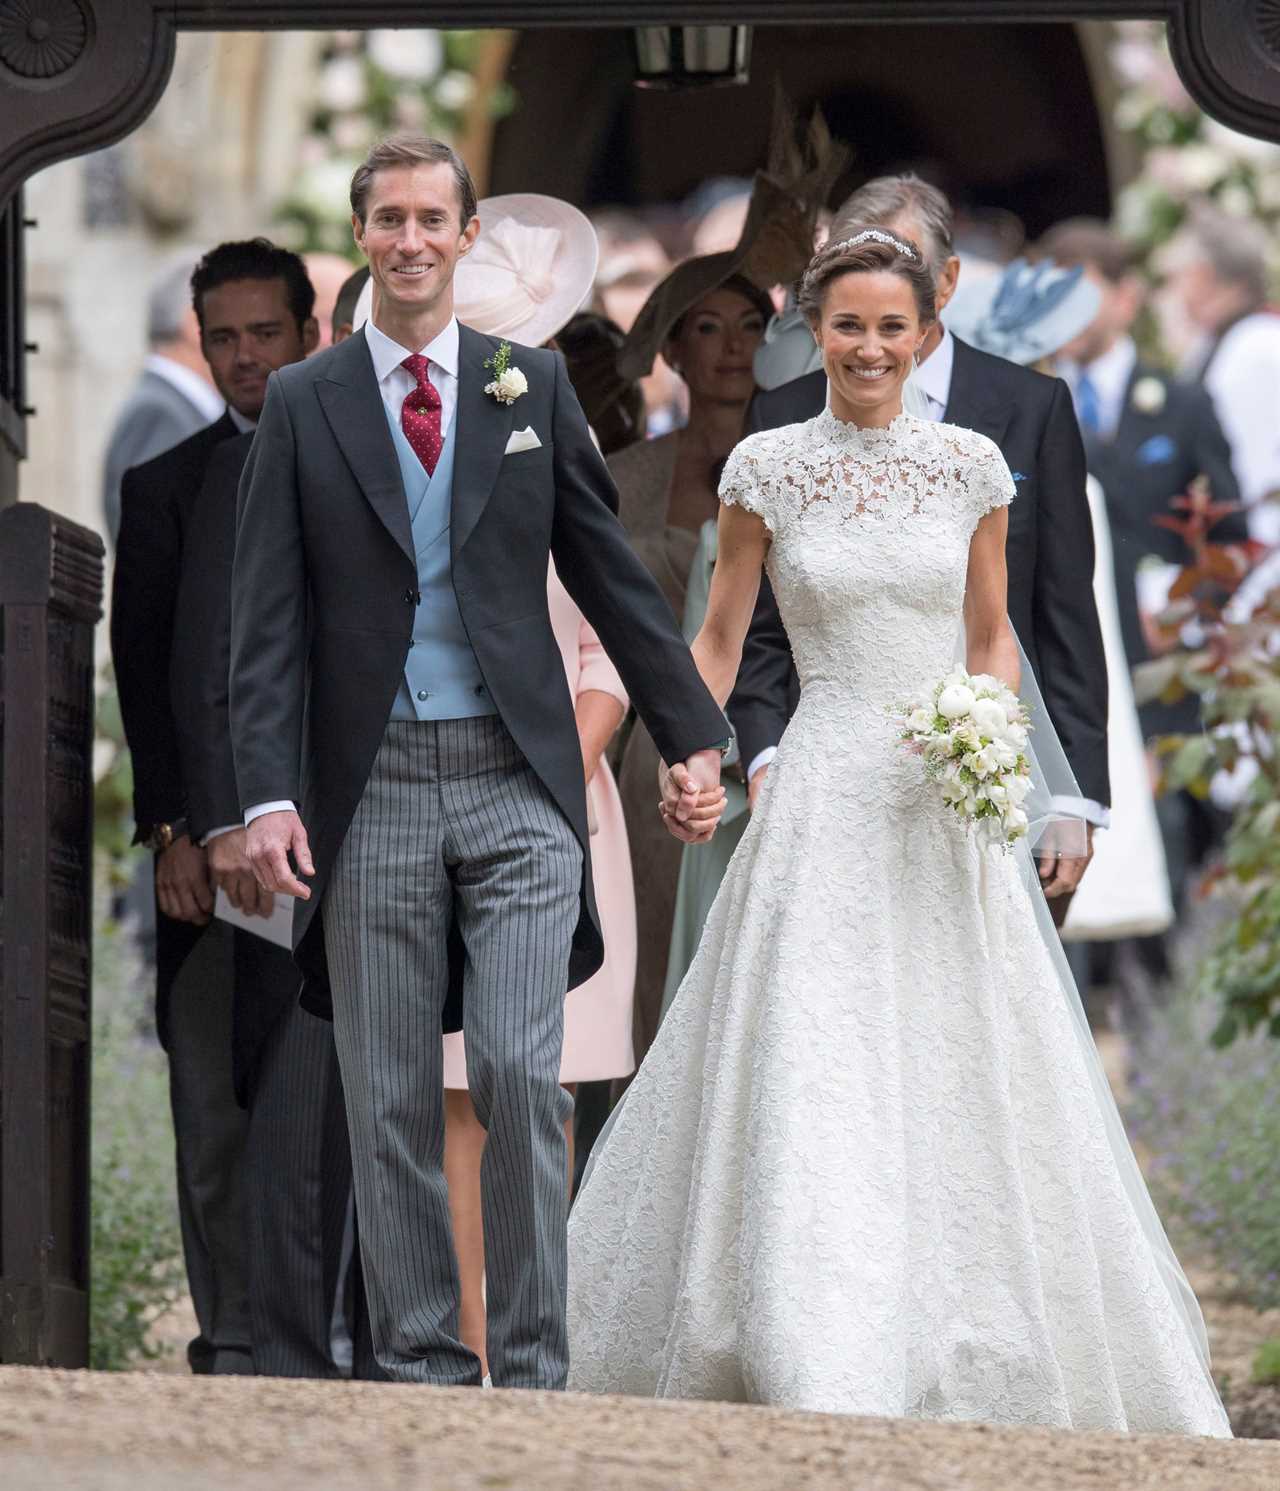 Pippa Middleton and husband James Matthews are expecting a second baby, it's reported